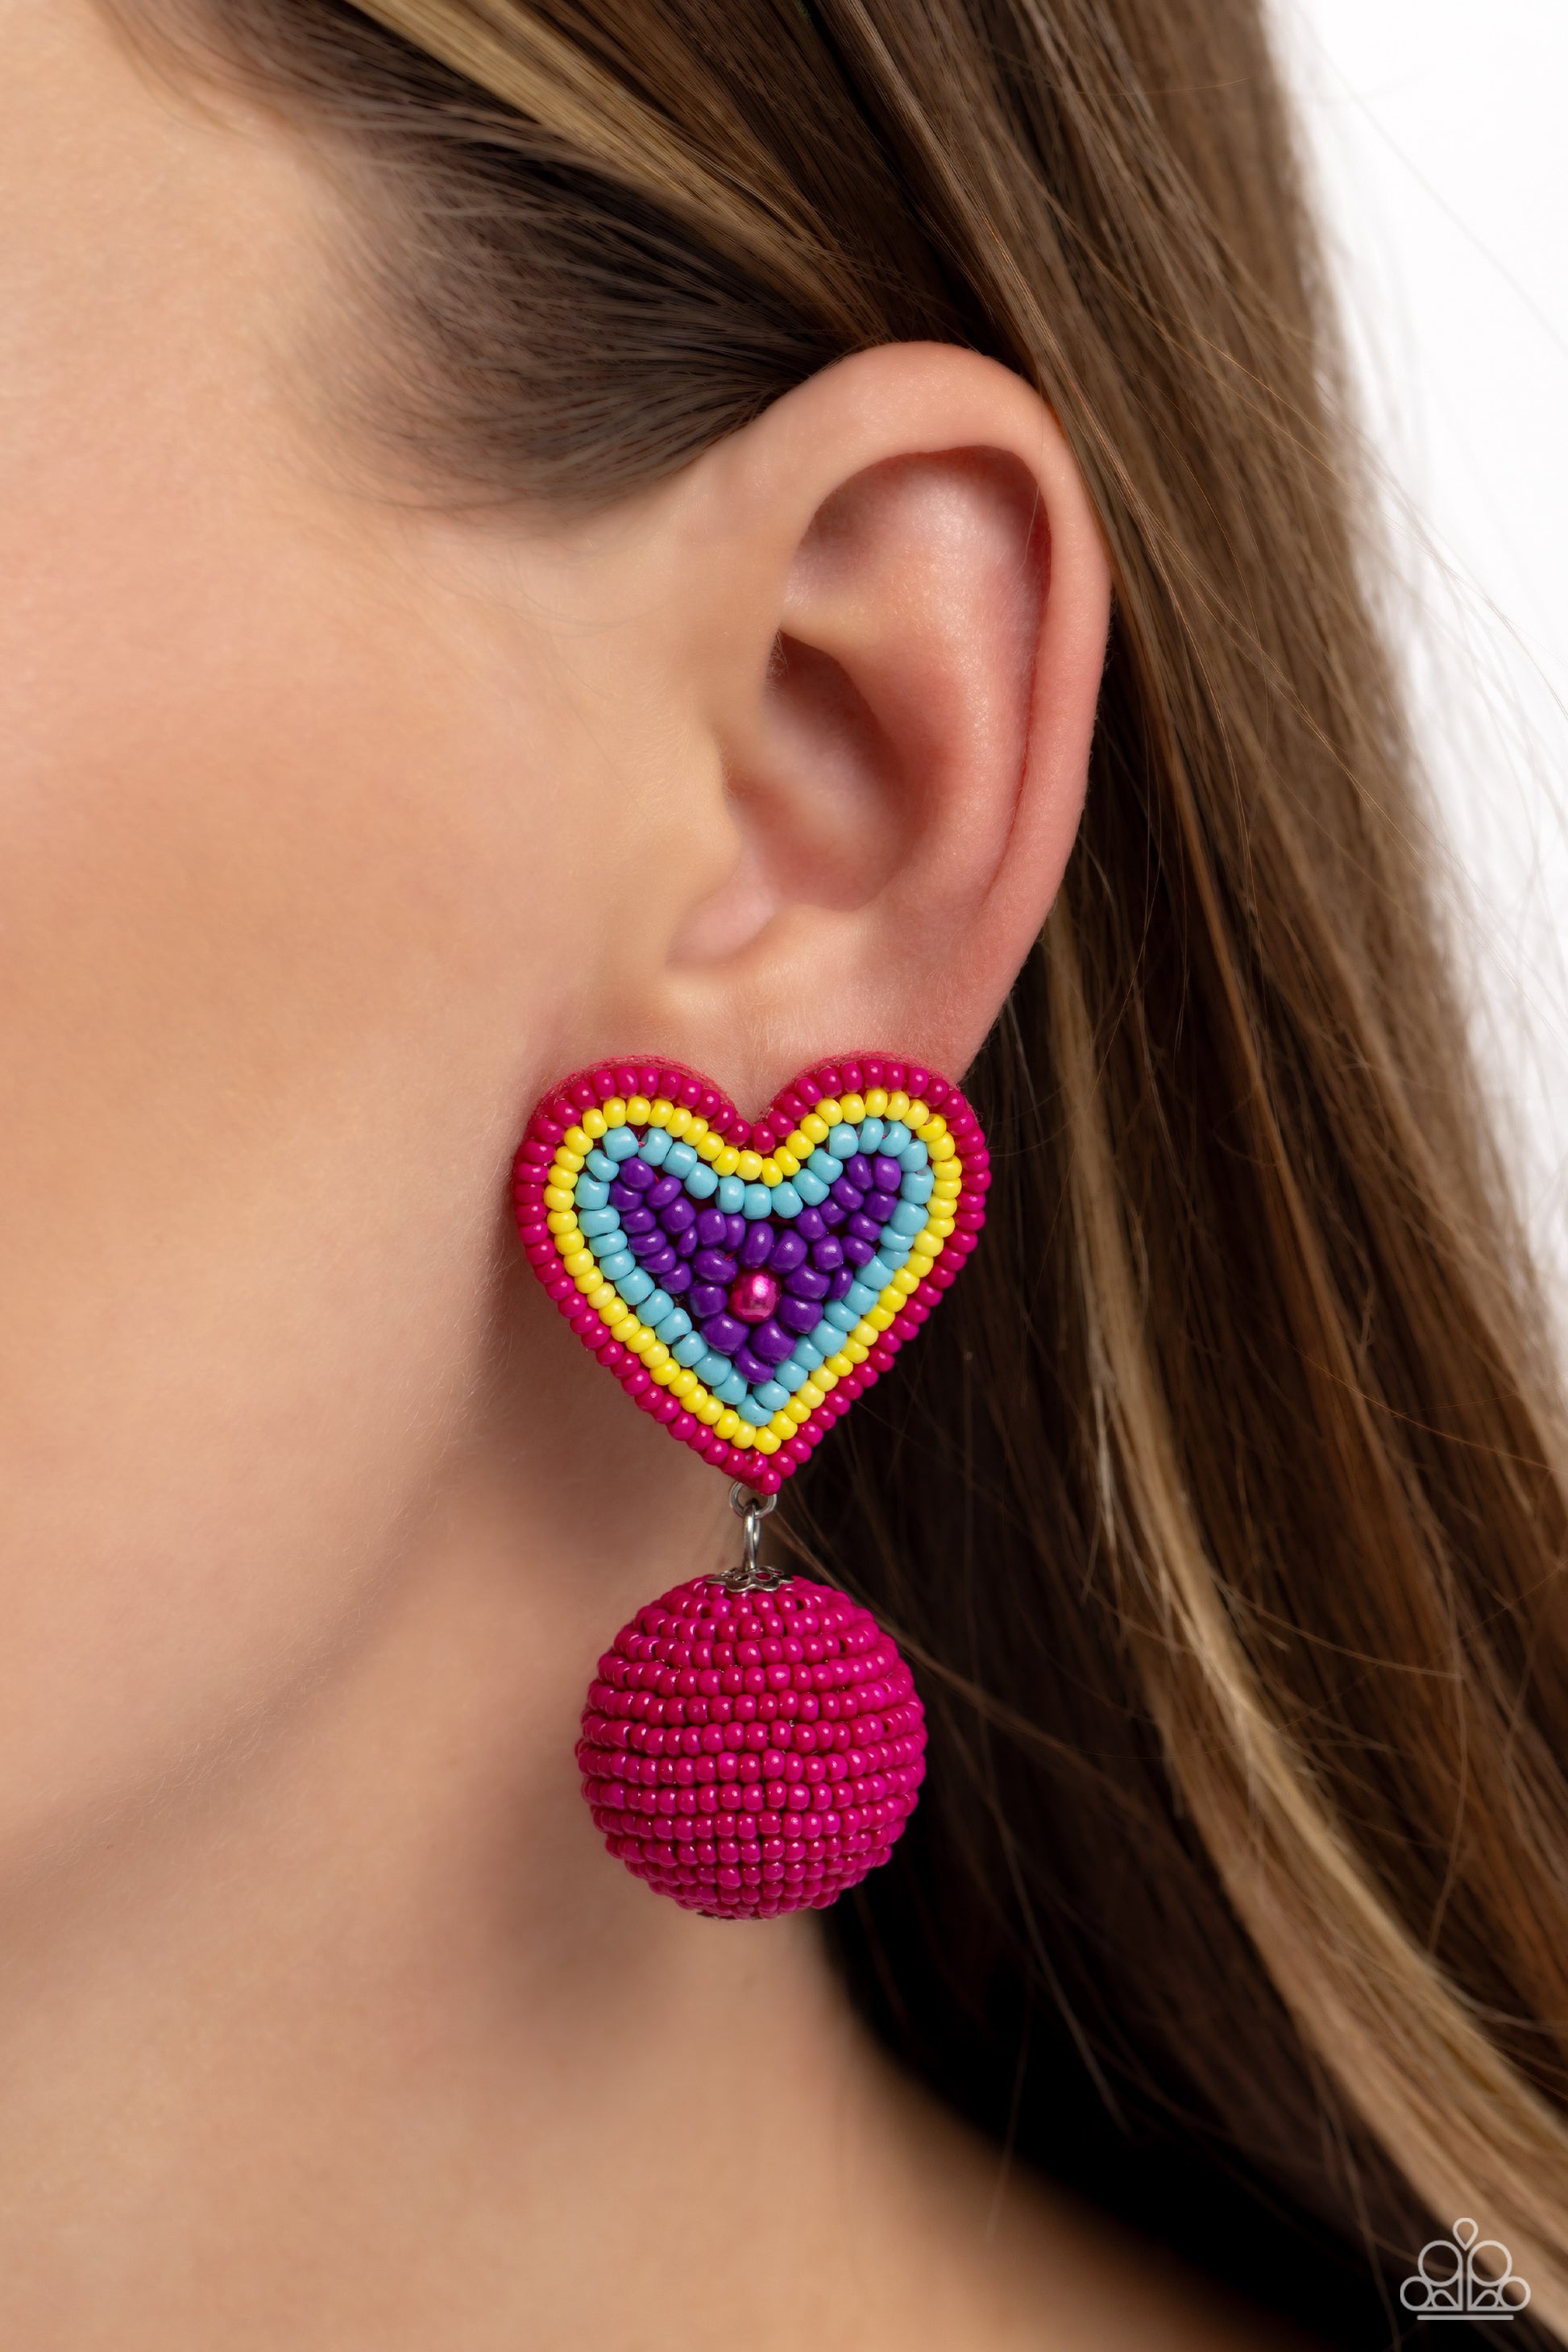 Spherical Sweethearts Multi Seed Bead Heart Post Earring - Paparazzi Accessories  Featuring a hot pink pearl center, a hot pink, yellow, turquoise, and purple seed bead heart frame gives way to strands of hot pink seed beads that decoratively spin around a spherical frame, resulting in a colorful three-dimensional display. Earring attaches to a standard post fitting.  Sold as one pair of post earrings.  P5PO-MTXX-106XX